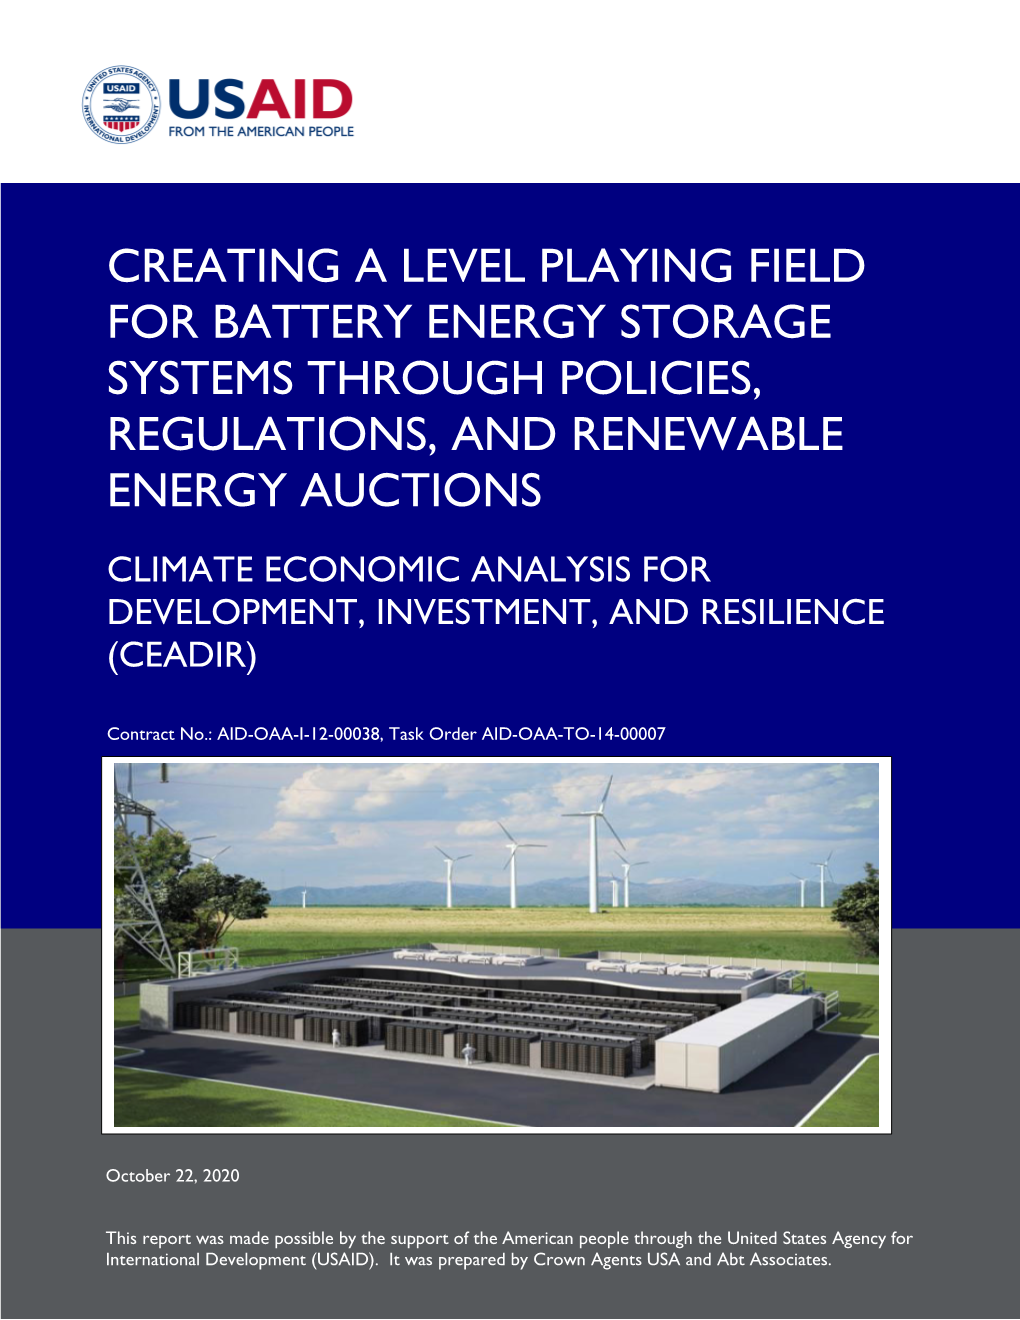 Creating a Level Playing Field for Battery Energy Storage Systems